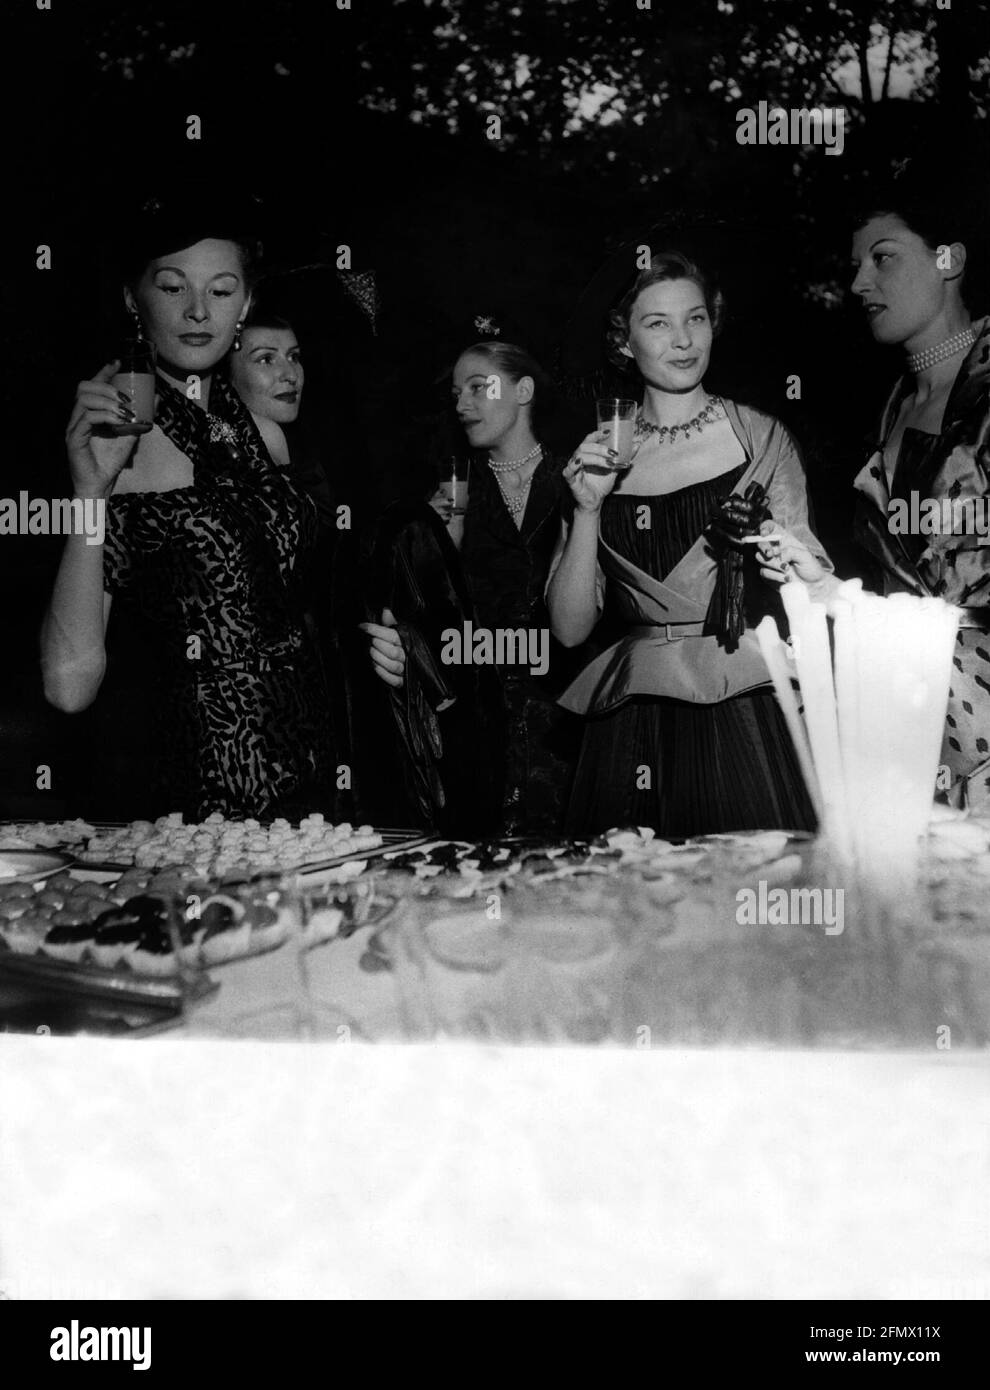 Festlichkeit, Partys, Cocktailparty, Paris, Frankreich, 1952, ADDITIONAL-RIGHTS-CLEARANCE-INFO-NOT-AVAILABLE Stockfoto